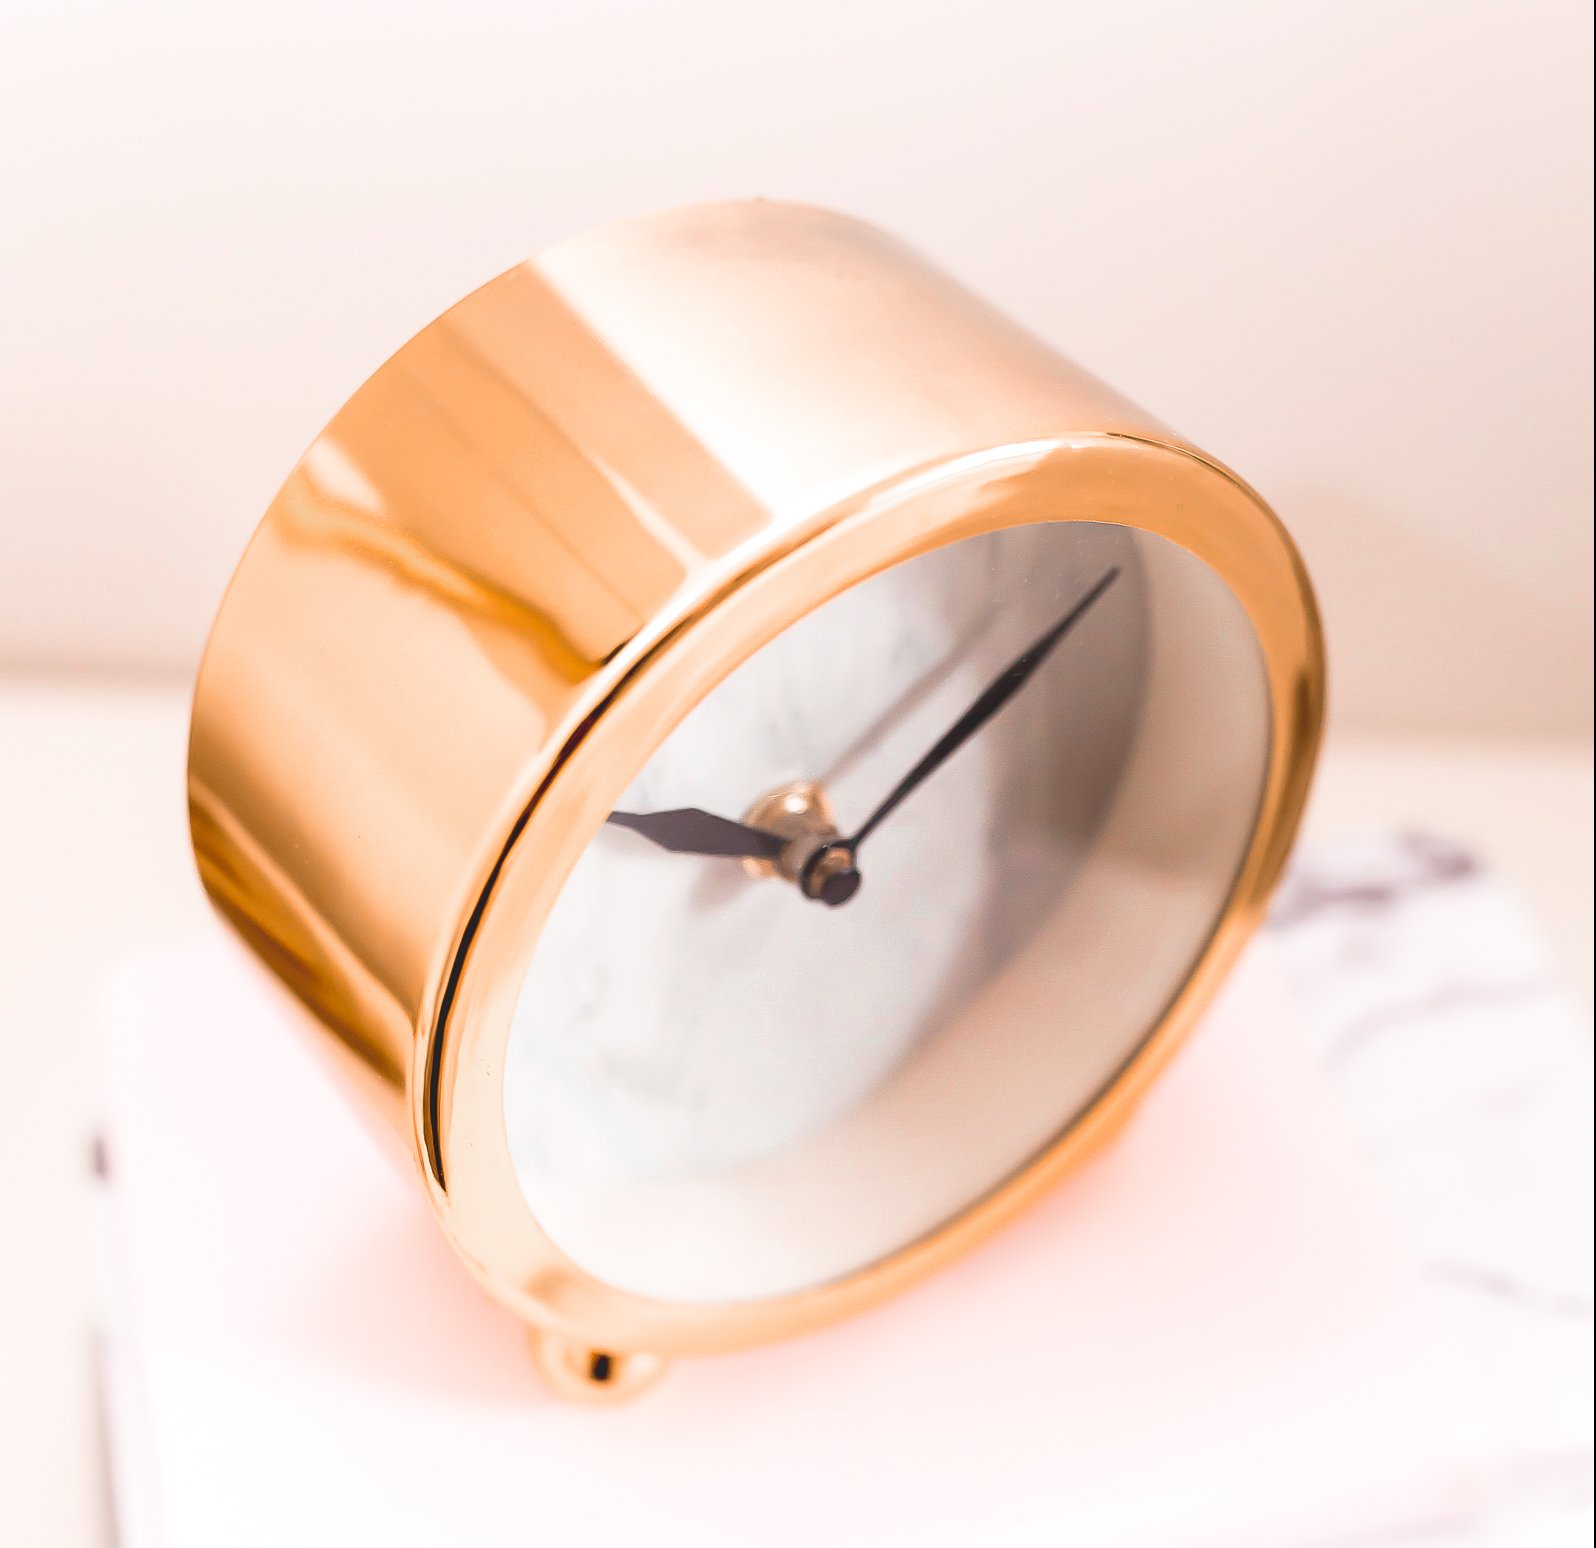 11 Time Management Strategies for Small Business Success